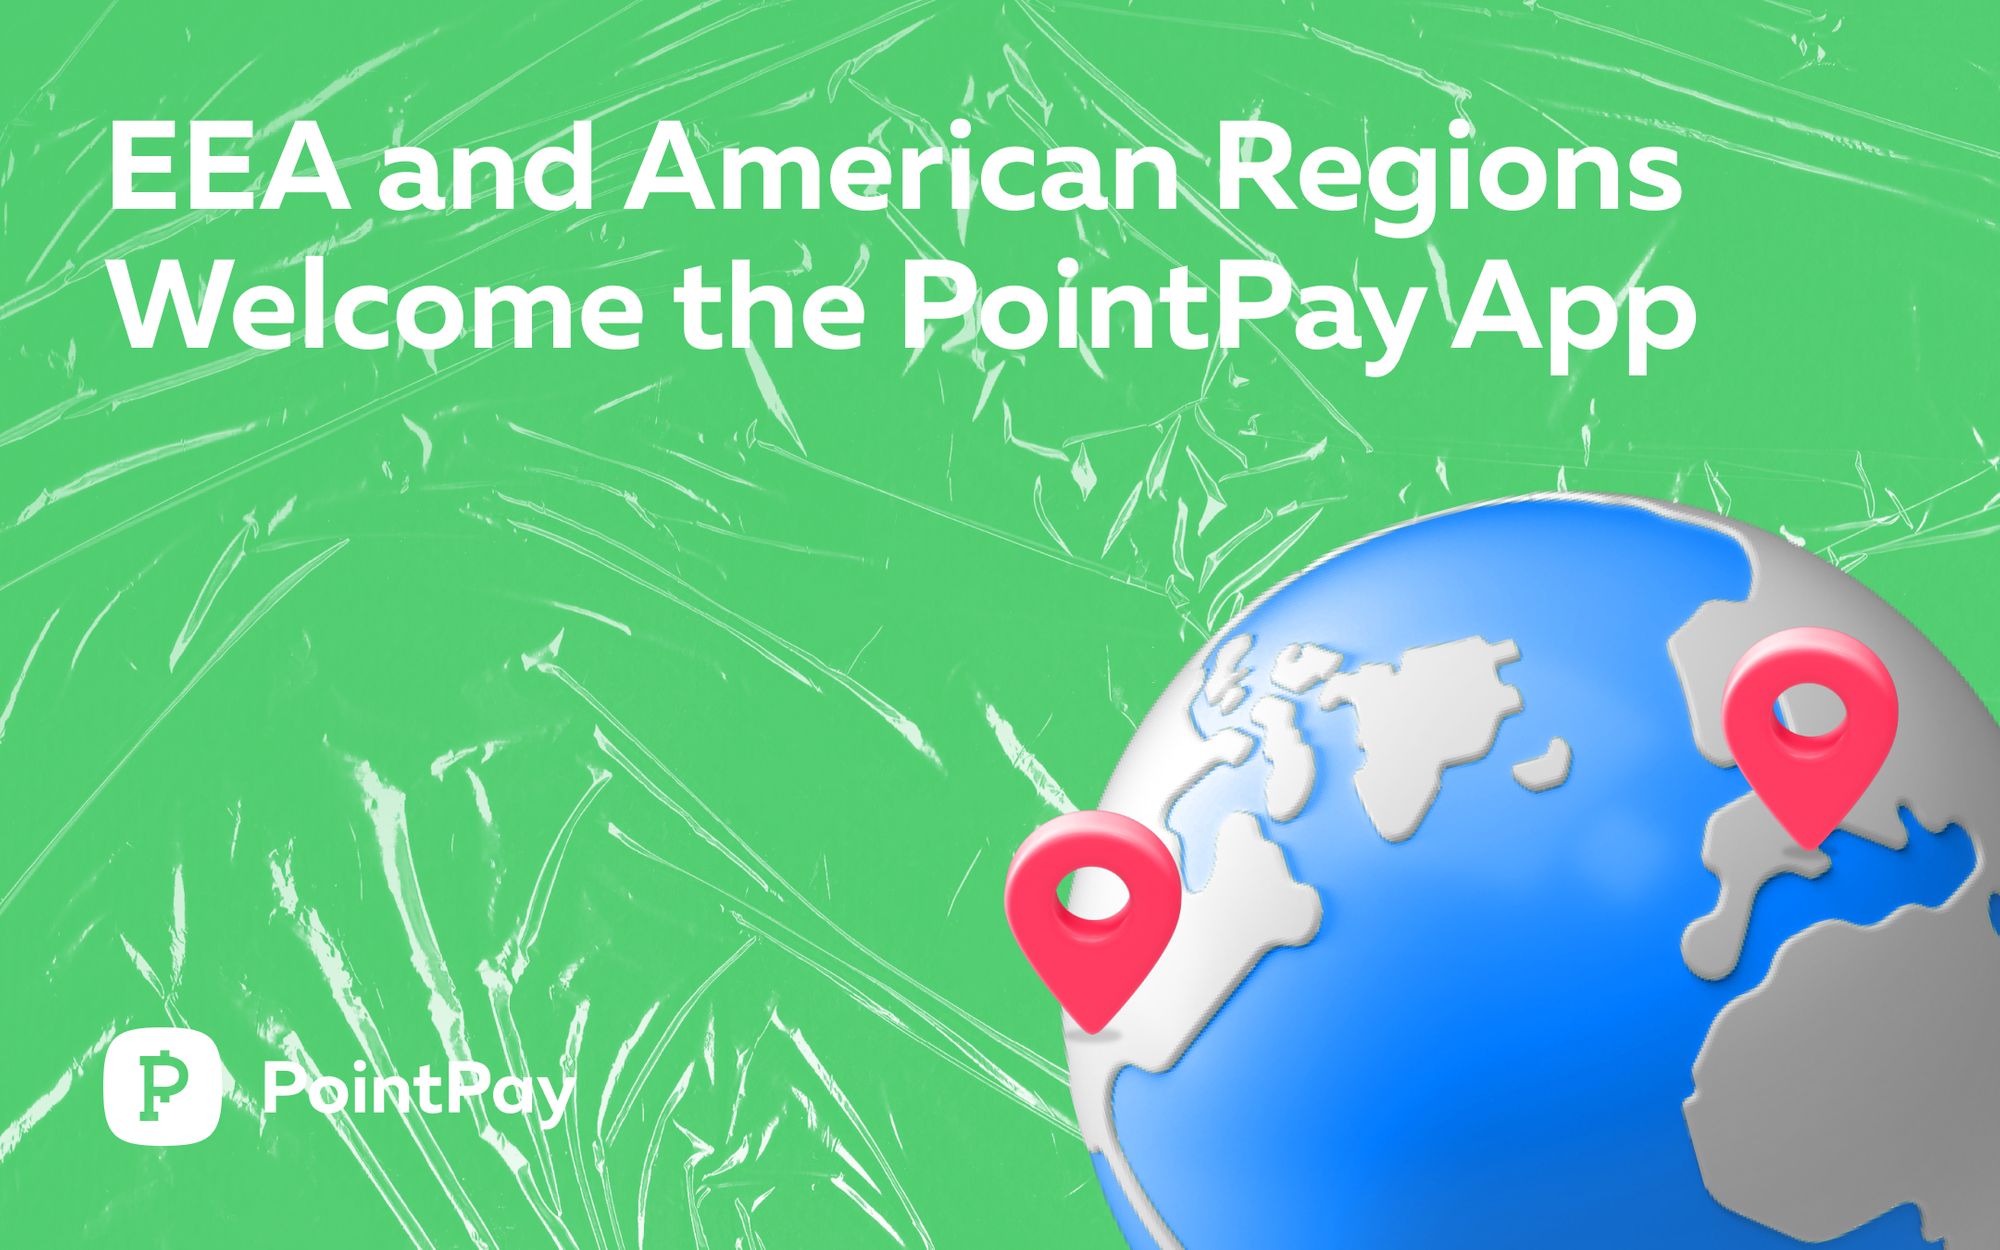 The PointPay app becomes available in all EEA countries and America.